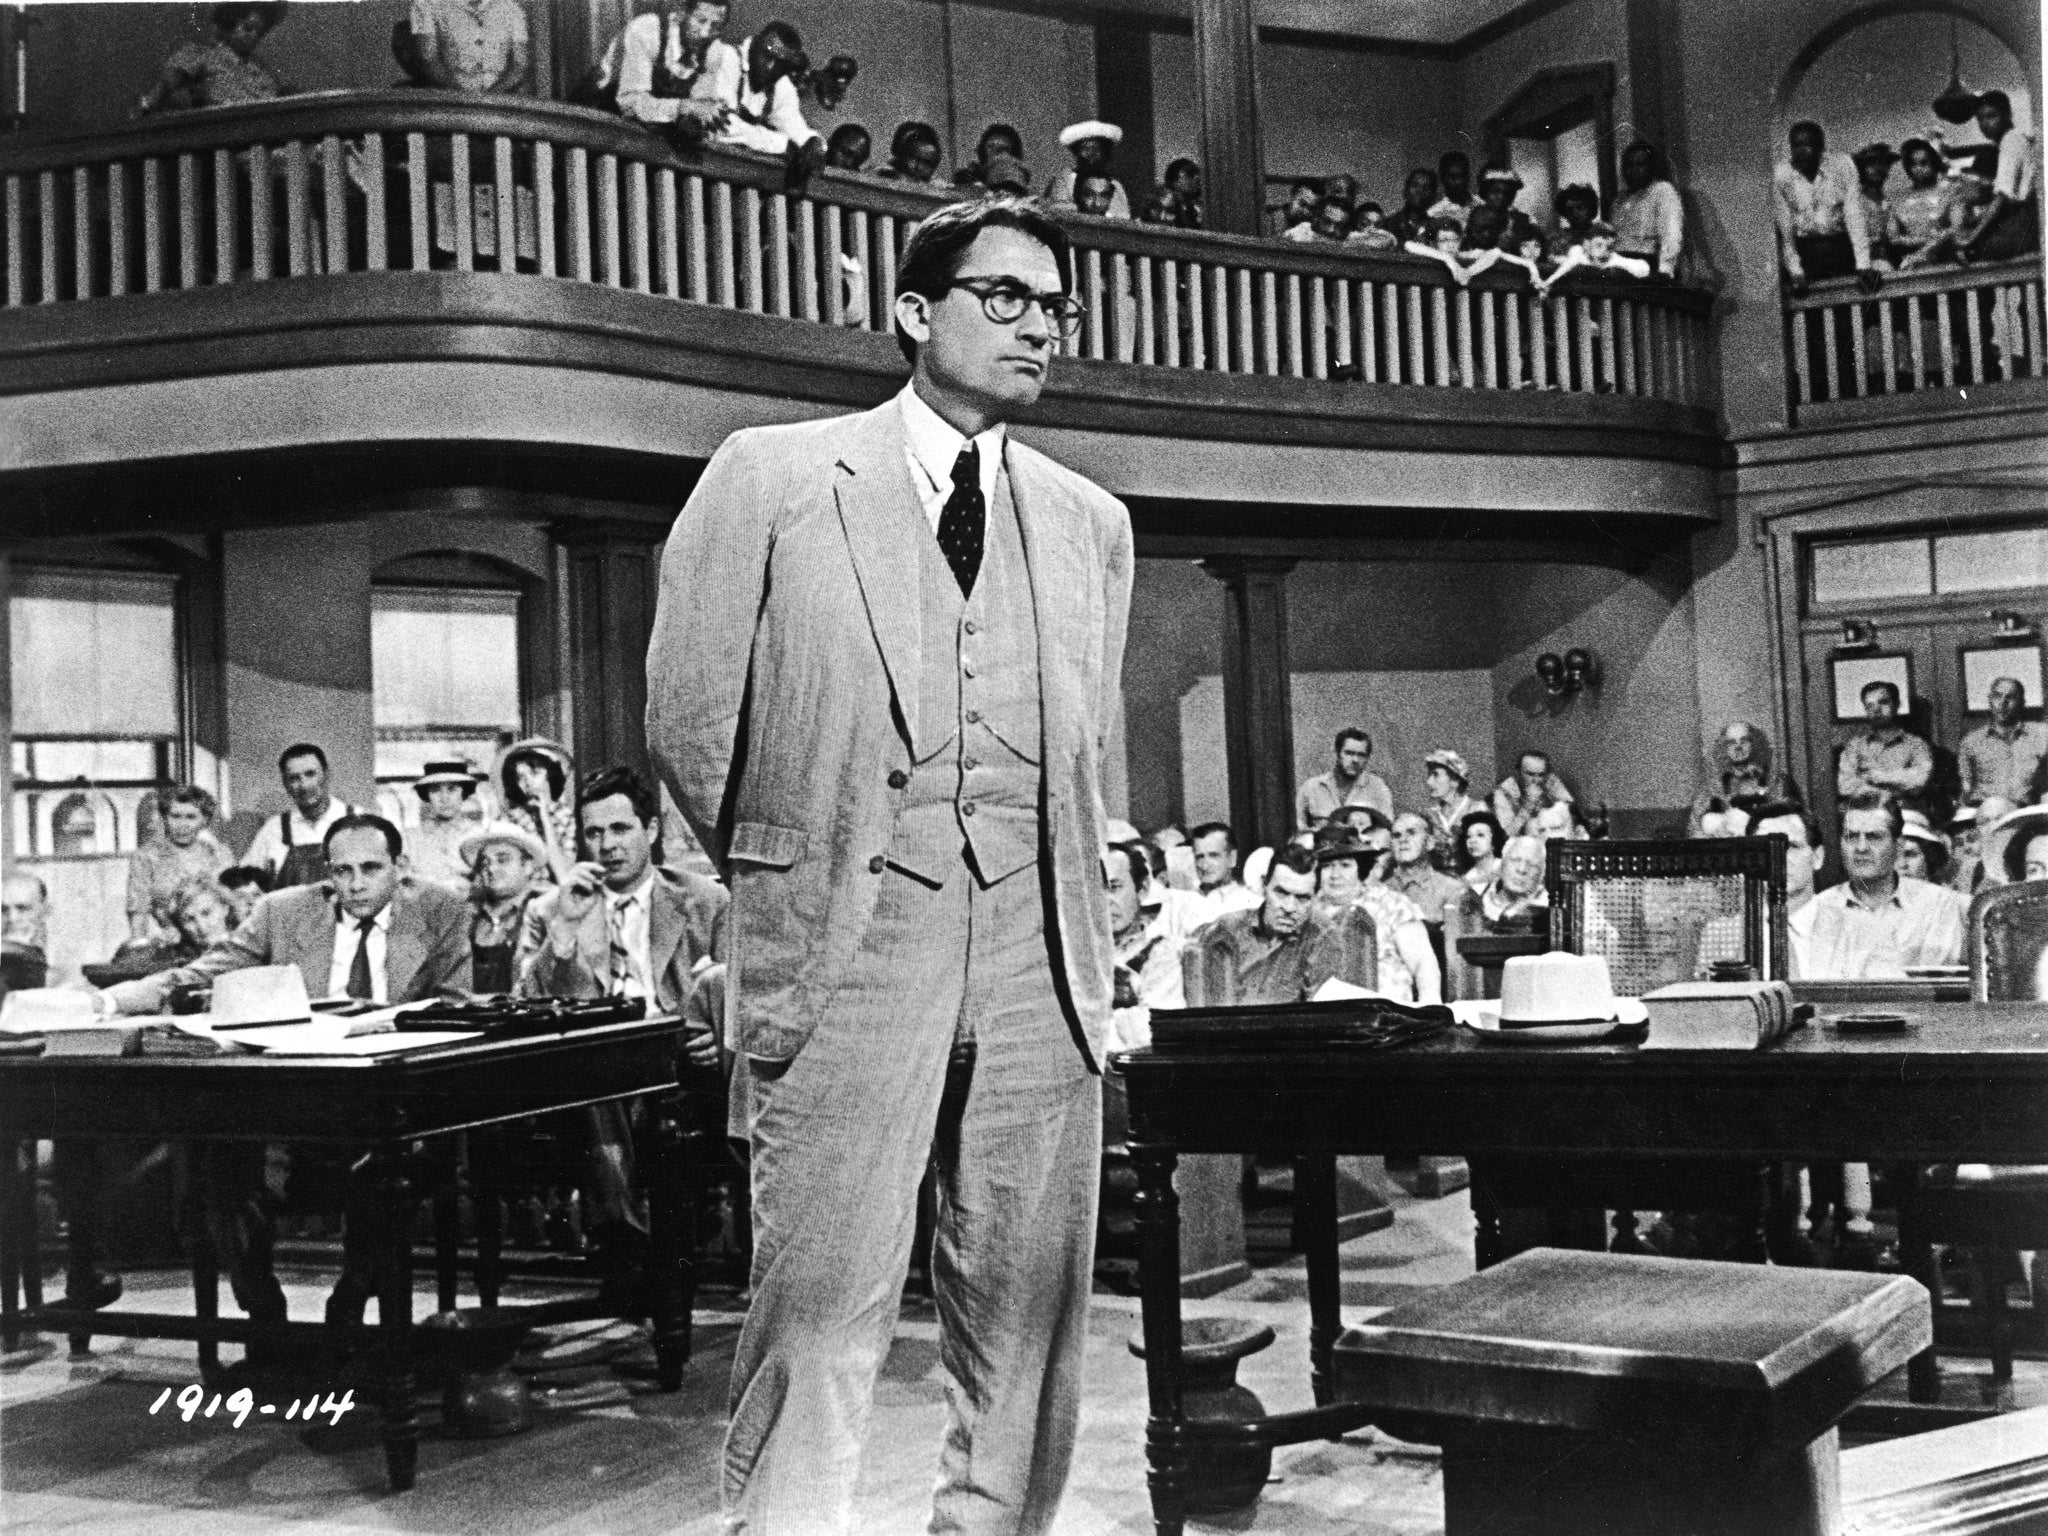 Gregory Peck in 'To Kill a Mockingbird'